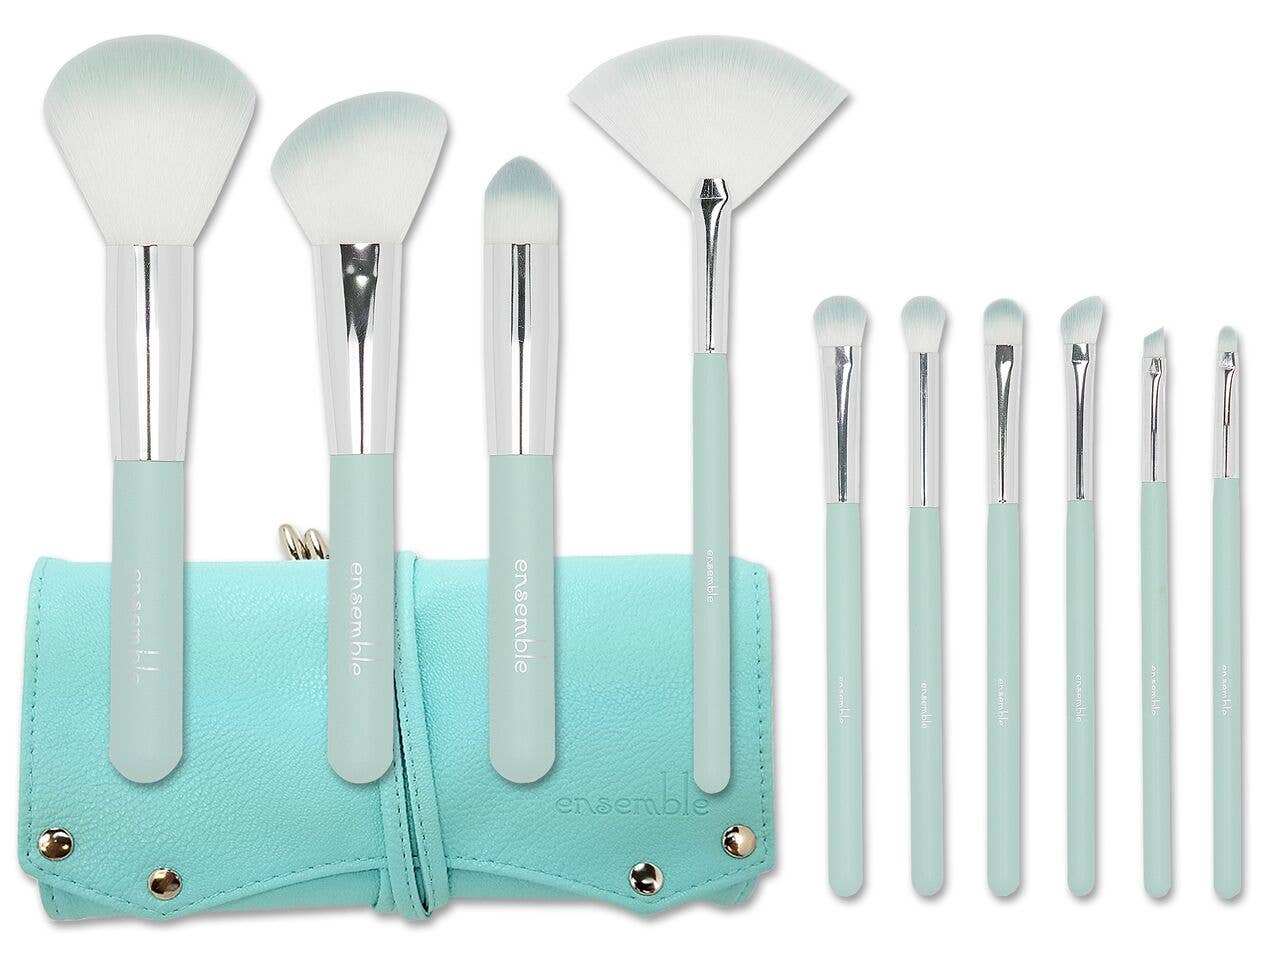 OFFA OTM5116 10pc Brush Set with Pouch MINT